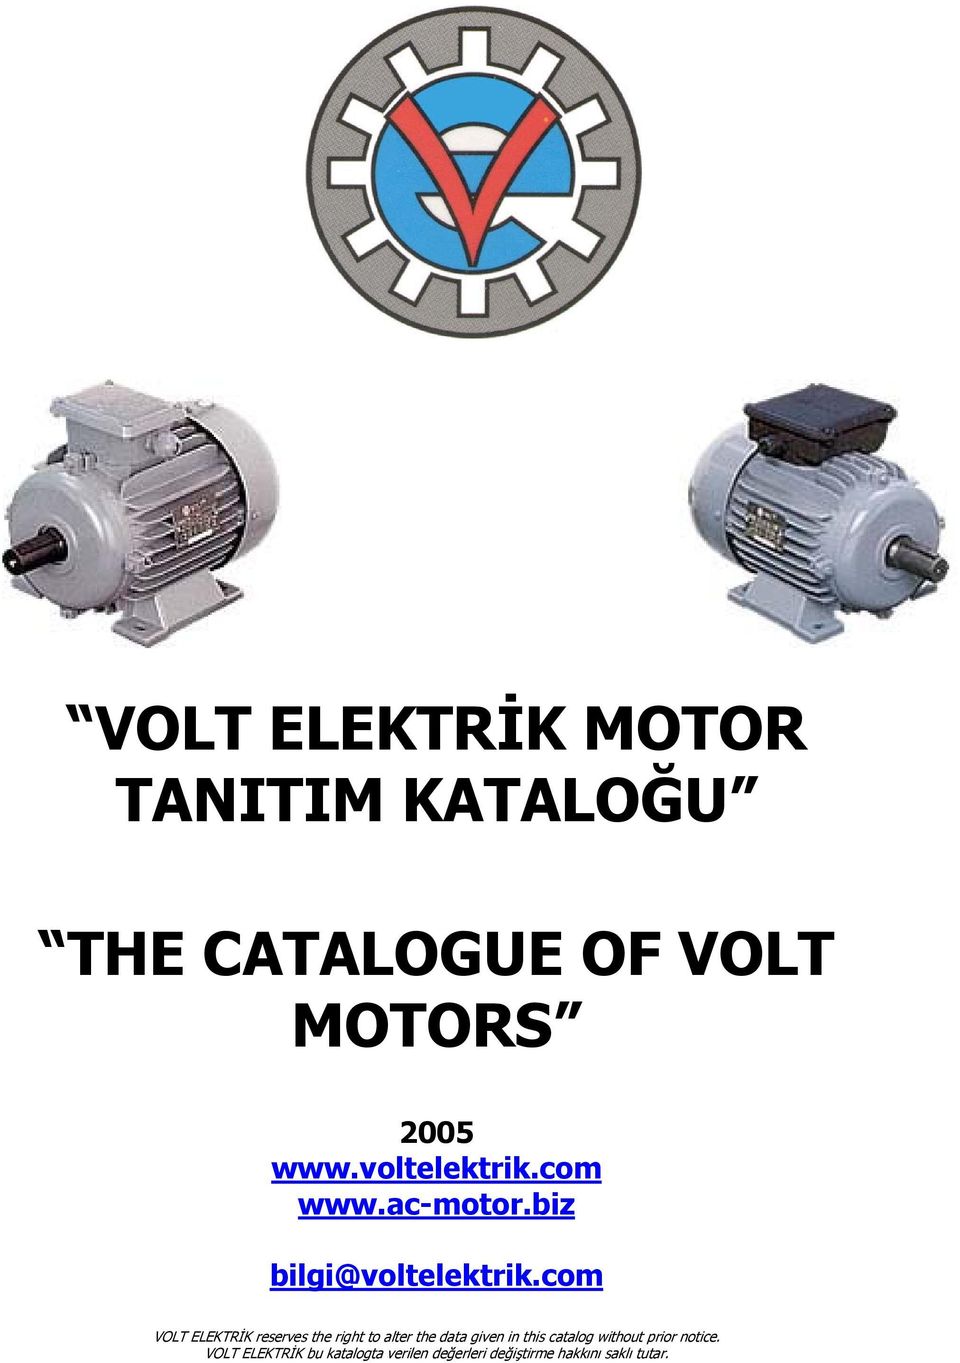 com VOLT ELEKTRİK reserves the right to alter the data given in this